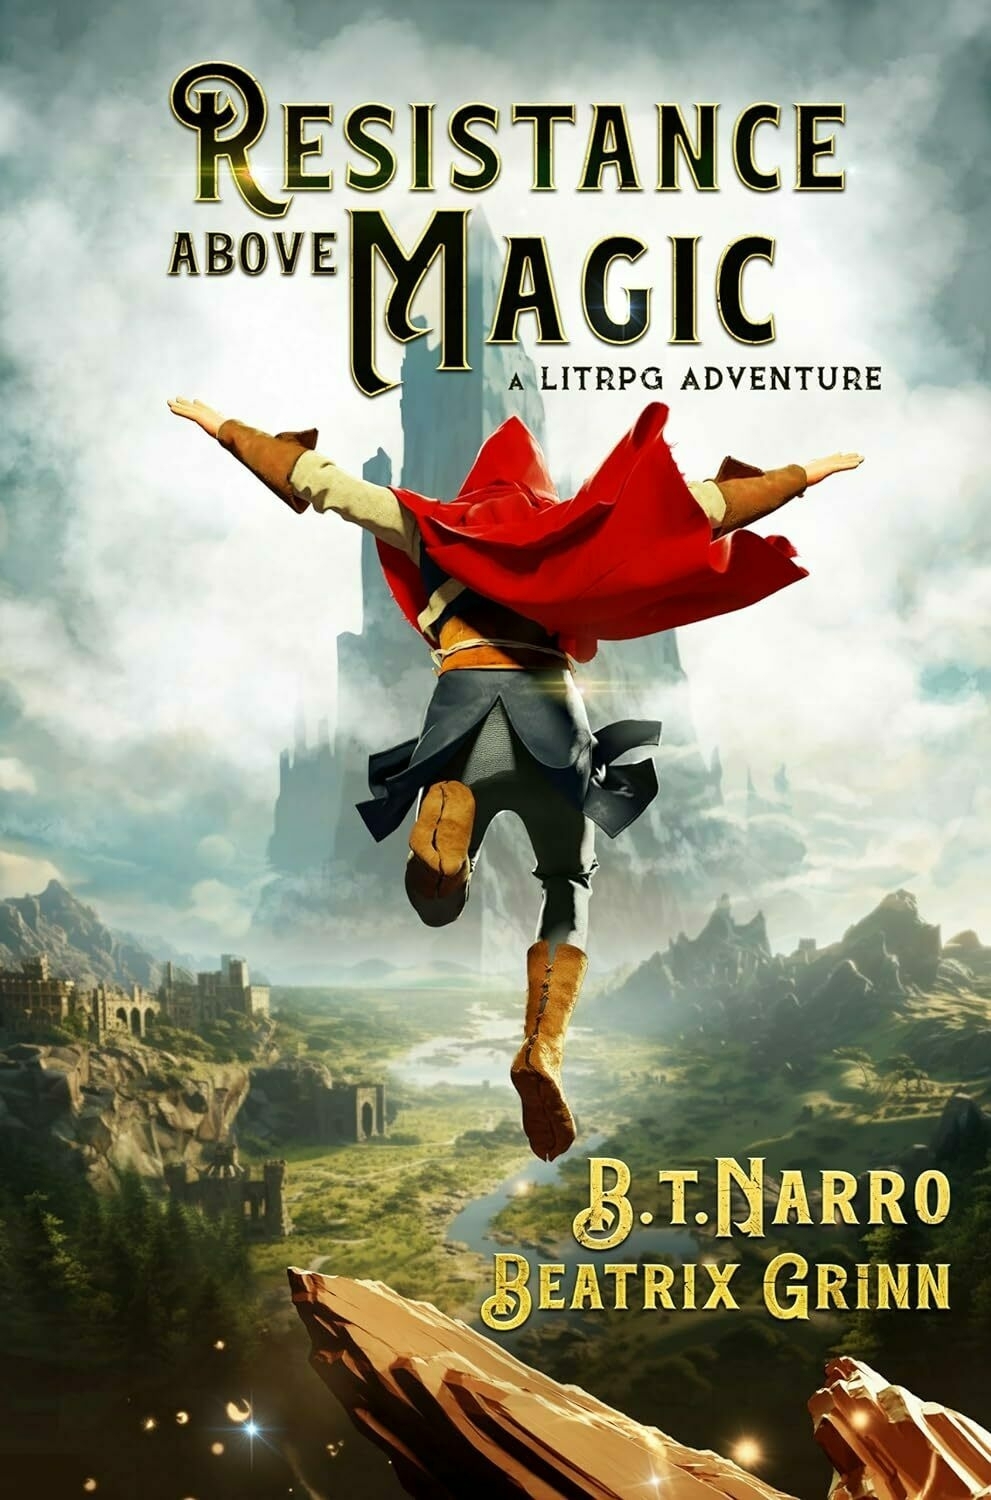 A person in red cape and medieval attire is floating above a fantasy landscape with castles. Text reads 'RESISTANCE ABOVE MAGIC A LITRPG ADVENTURE B.T. Narro Beatrix Grinn'.